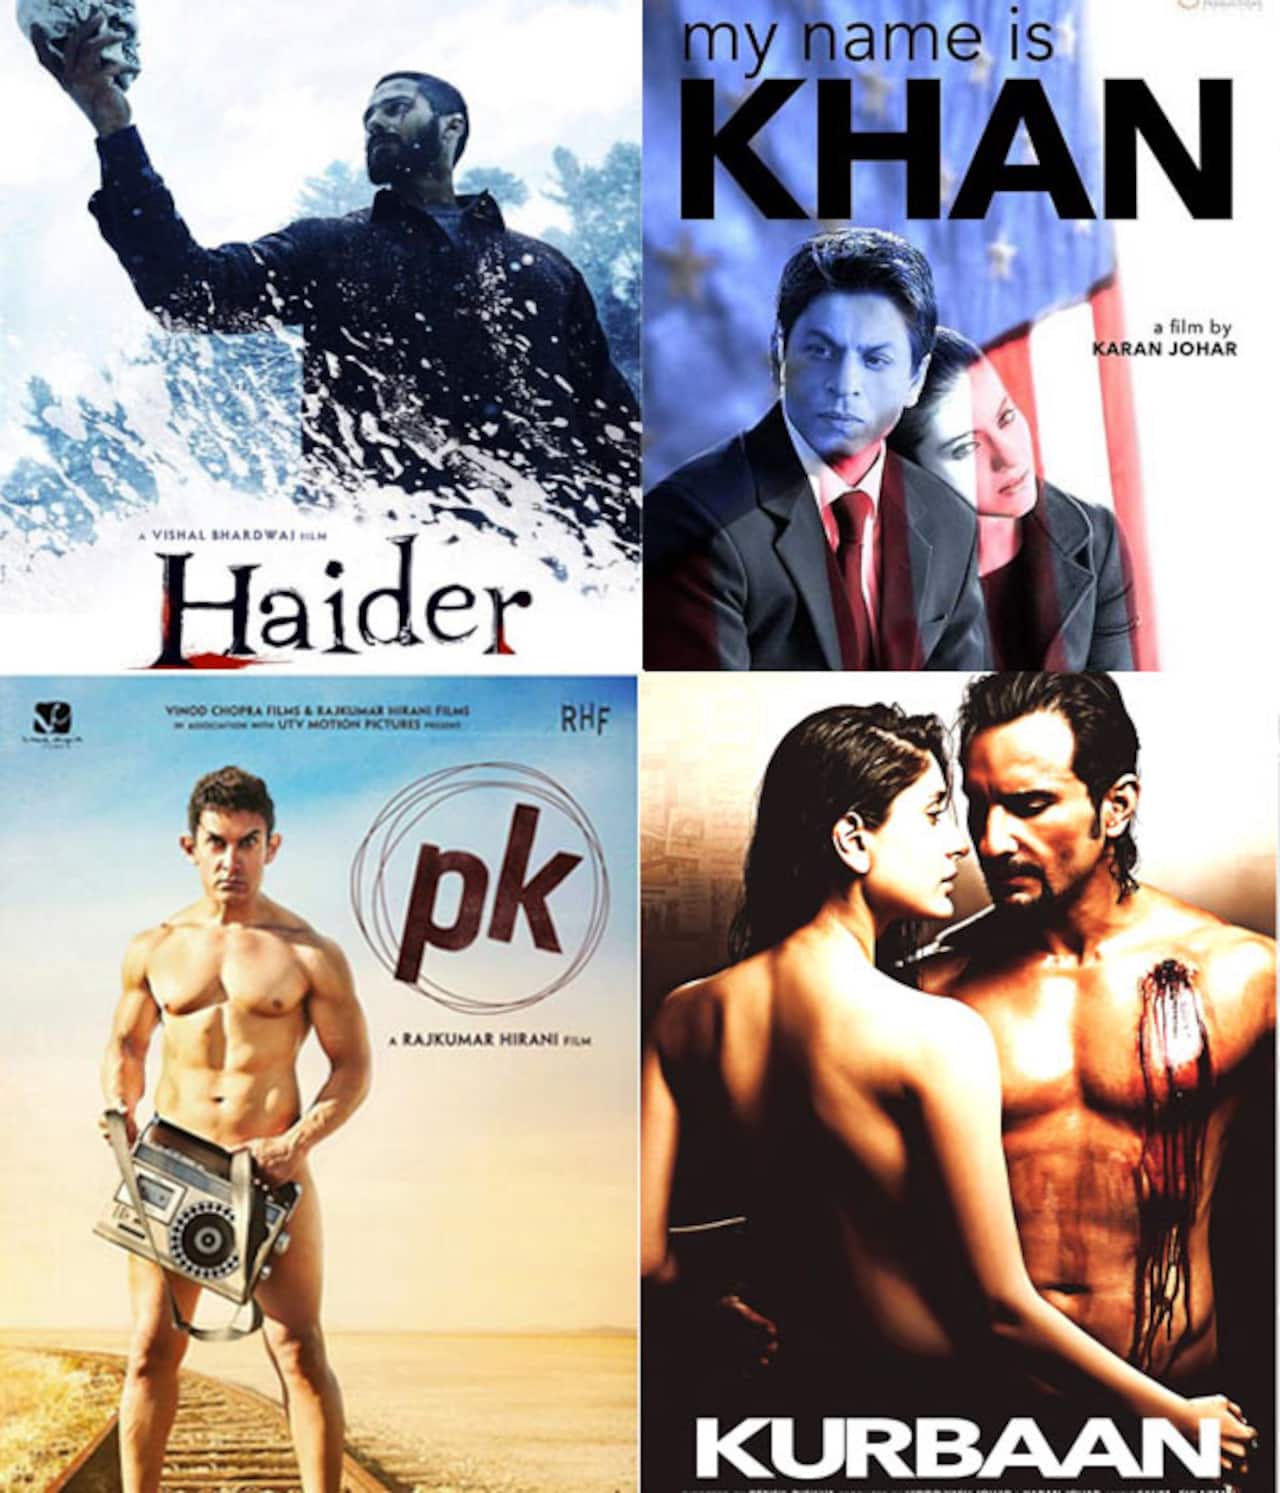 My Name is Khan, PK, Kurbaan - films that got embroiled in political controversy before Udta Punjab